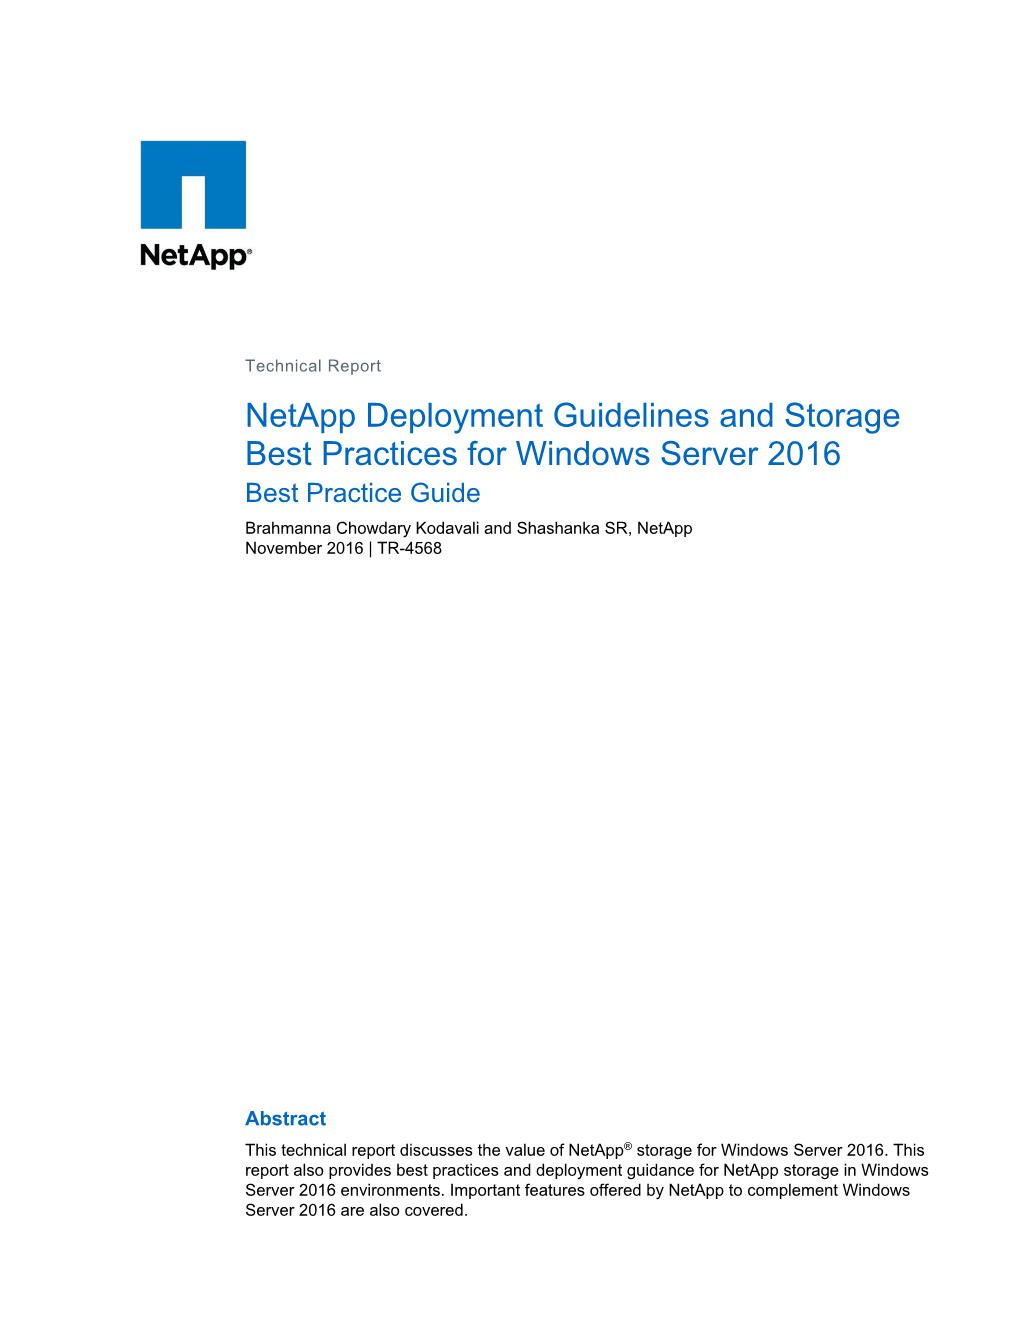 Netapp Deployment Guidelines and Storage Best Practices for Windows